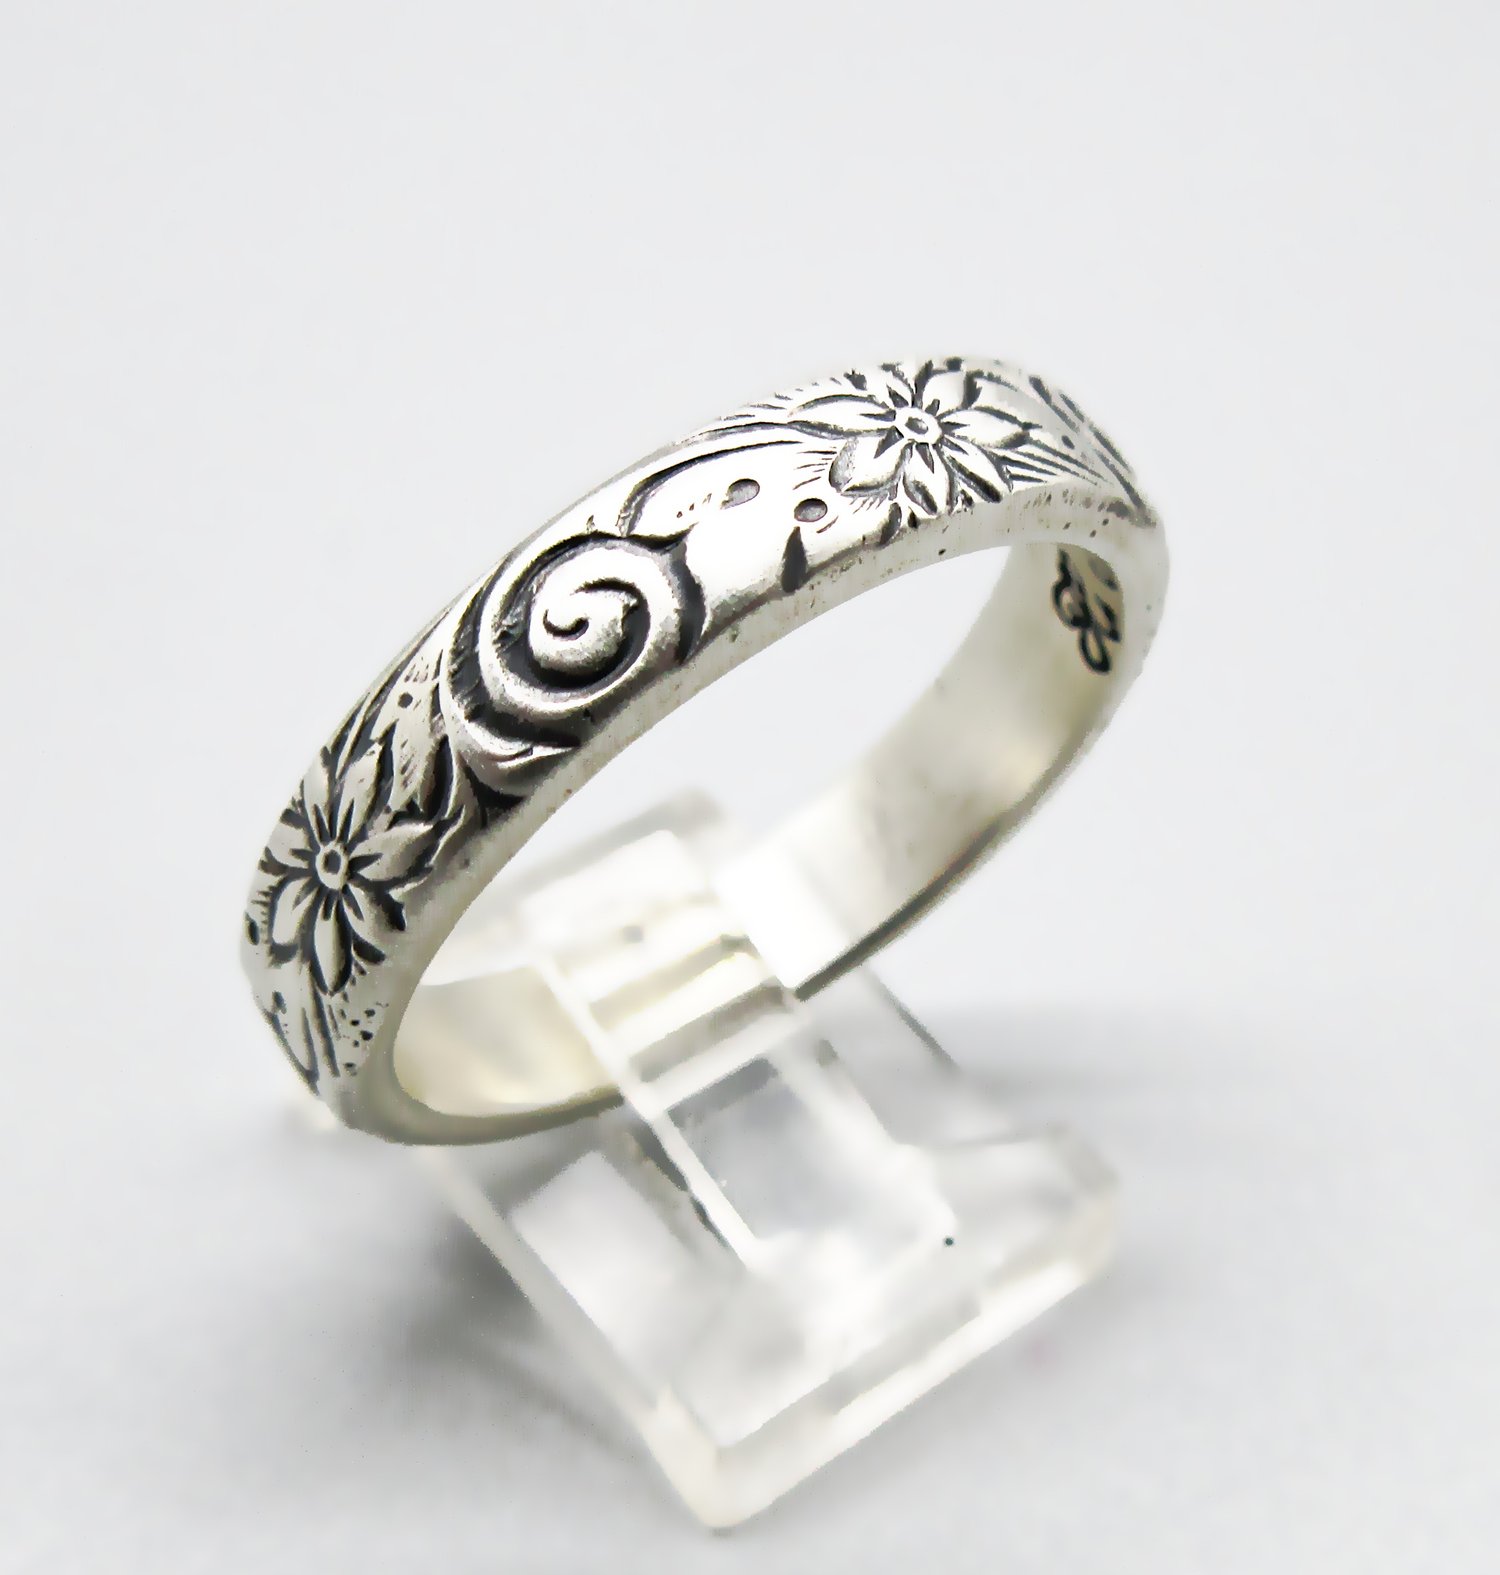 Stainless Steel Embossed Vines Cast Band Ring. 